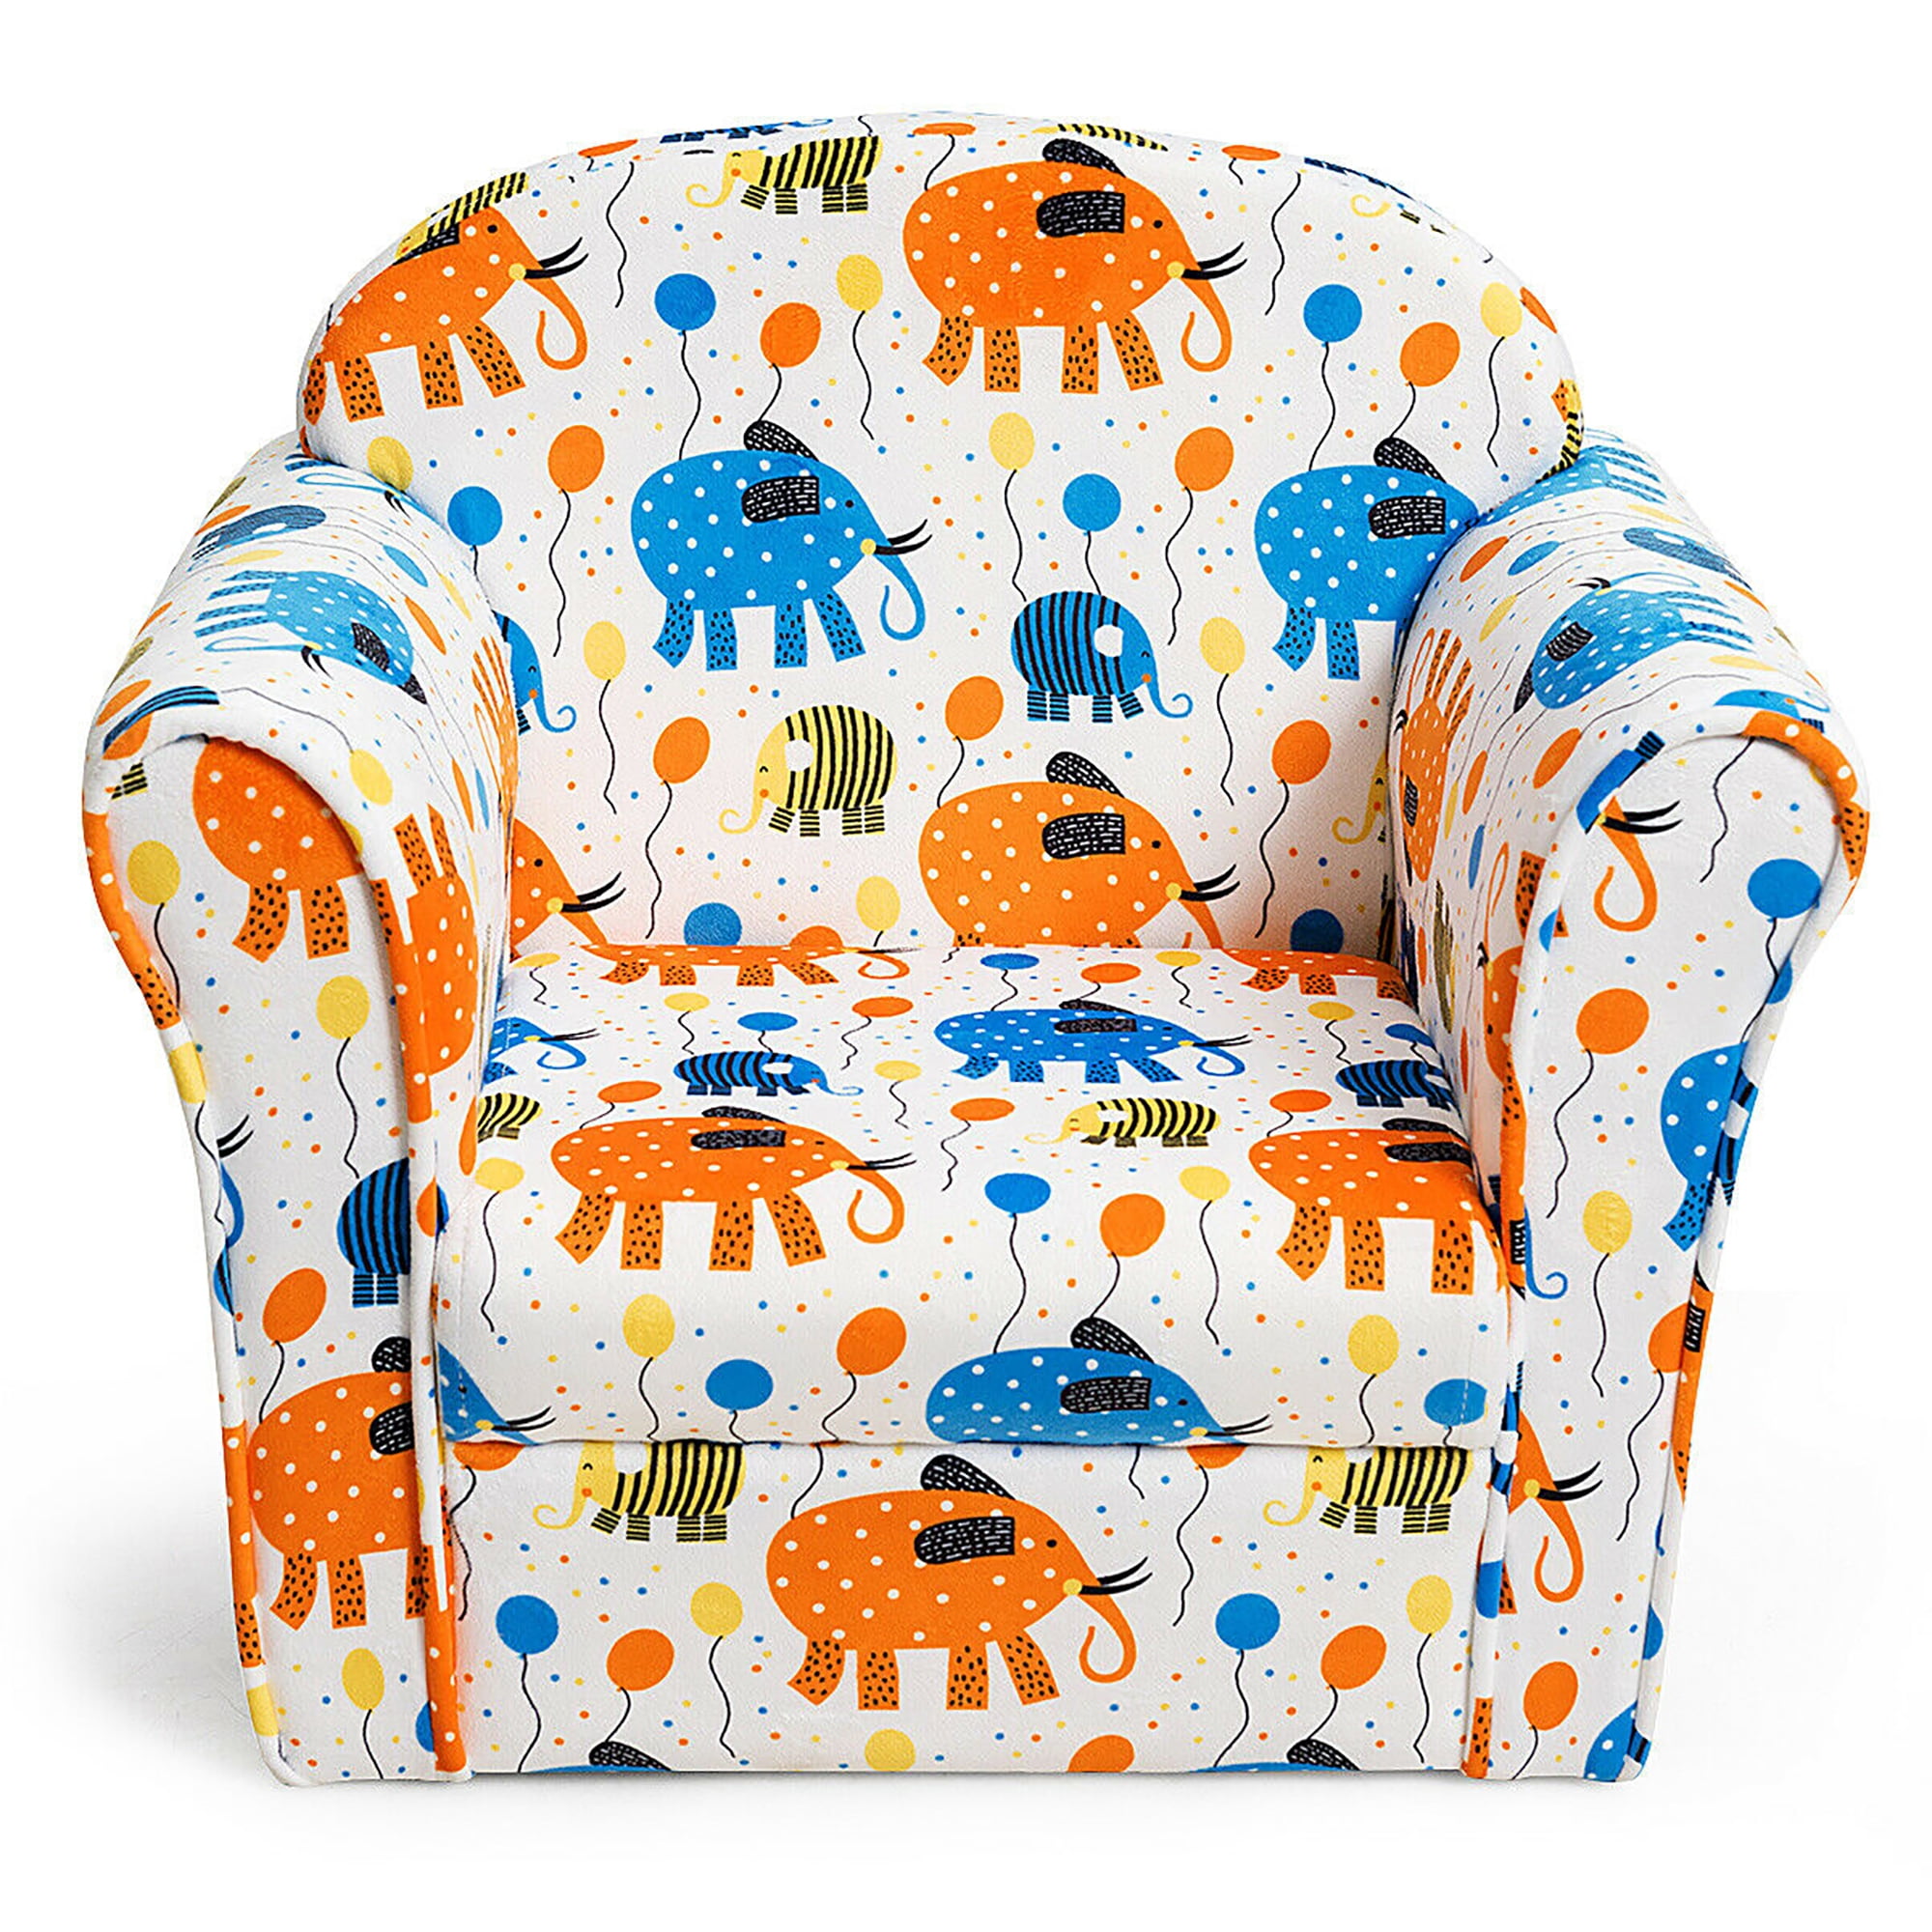 Elephant Childrens Chair Toddler Children Washable Removable Cover Play Room 